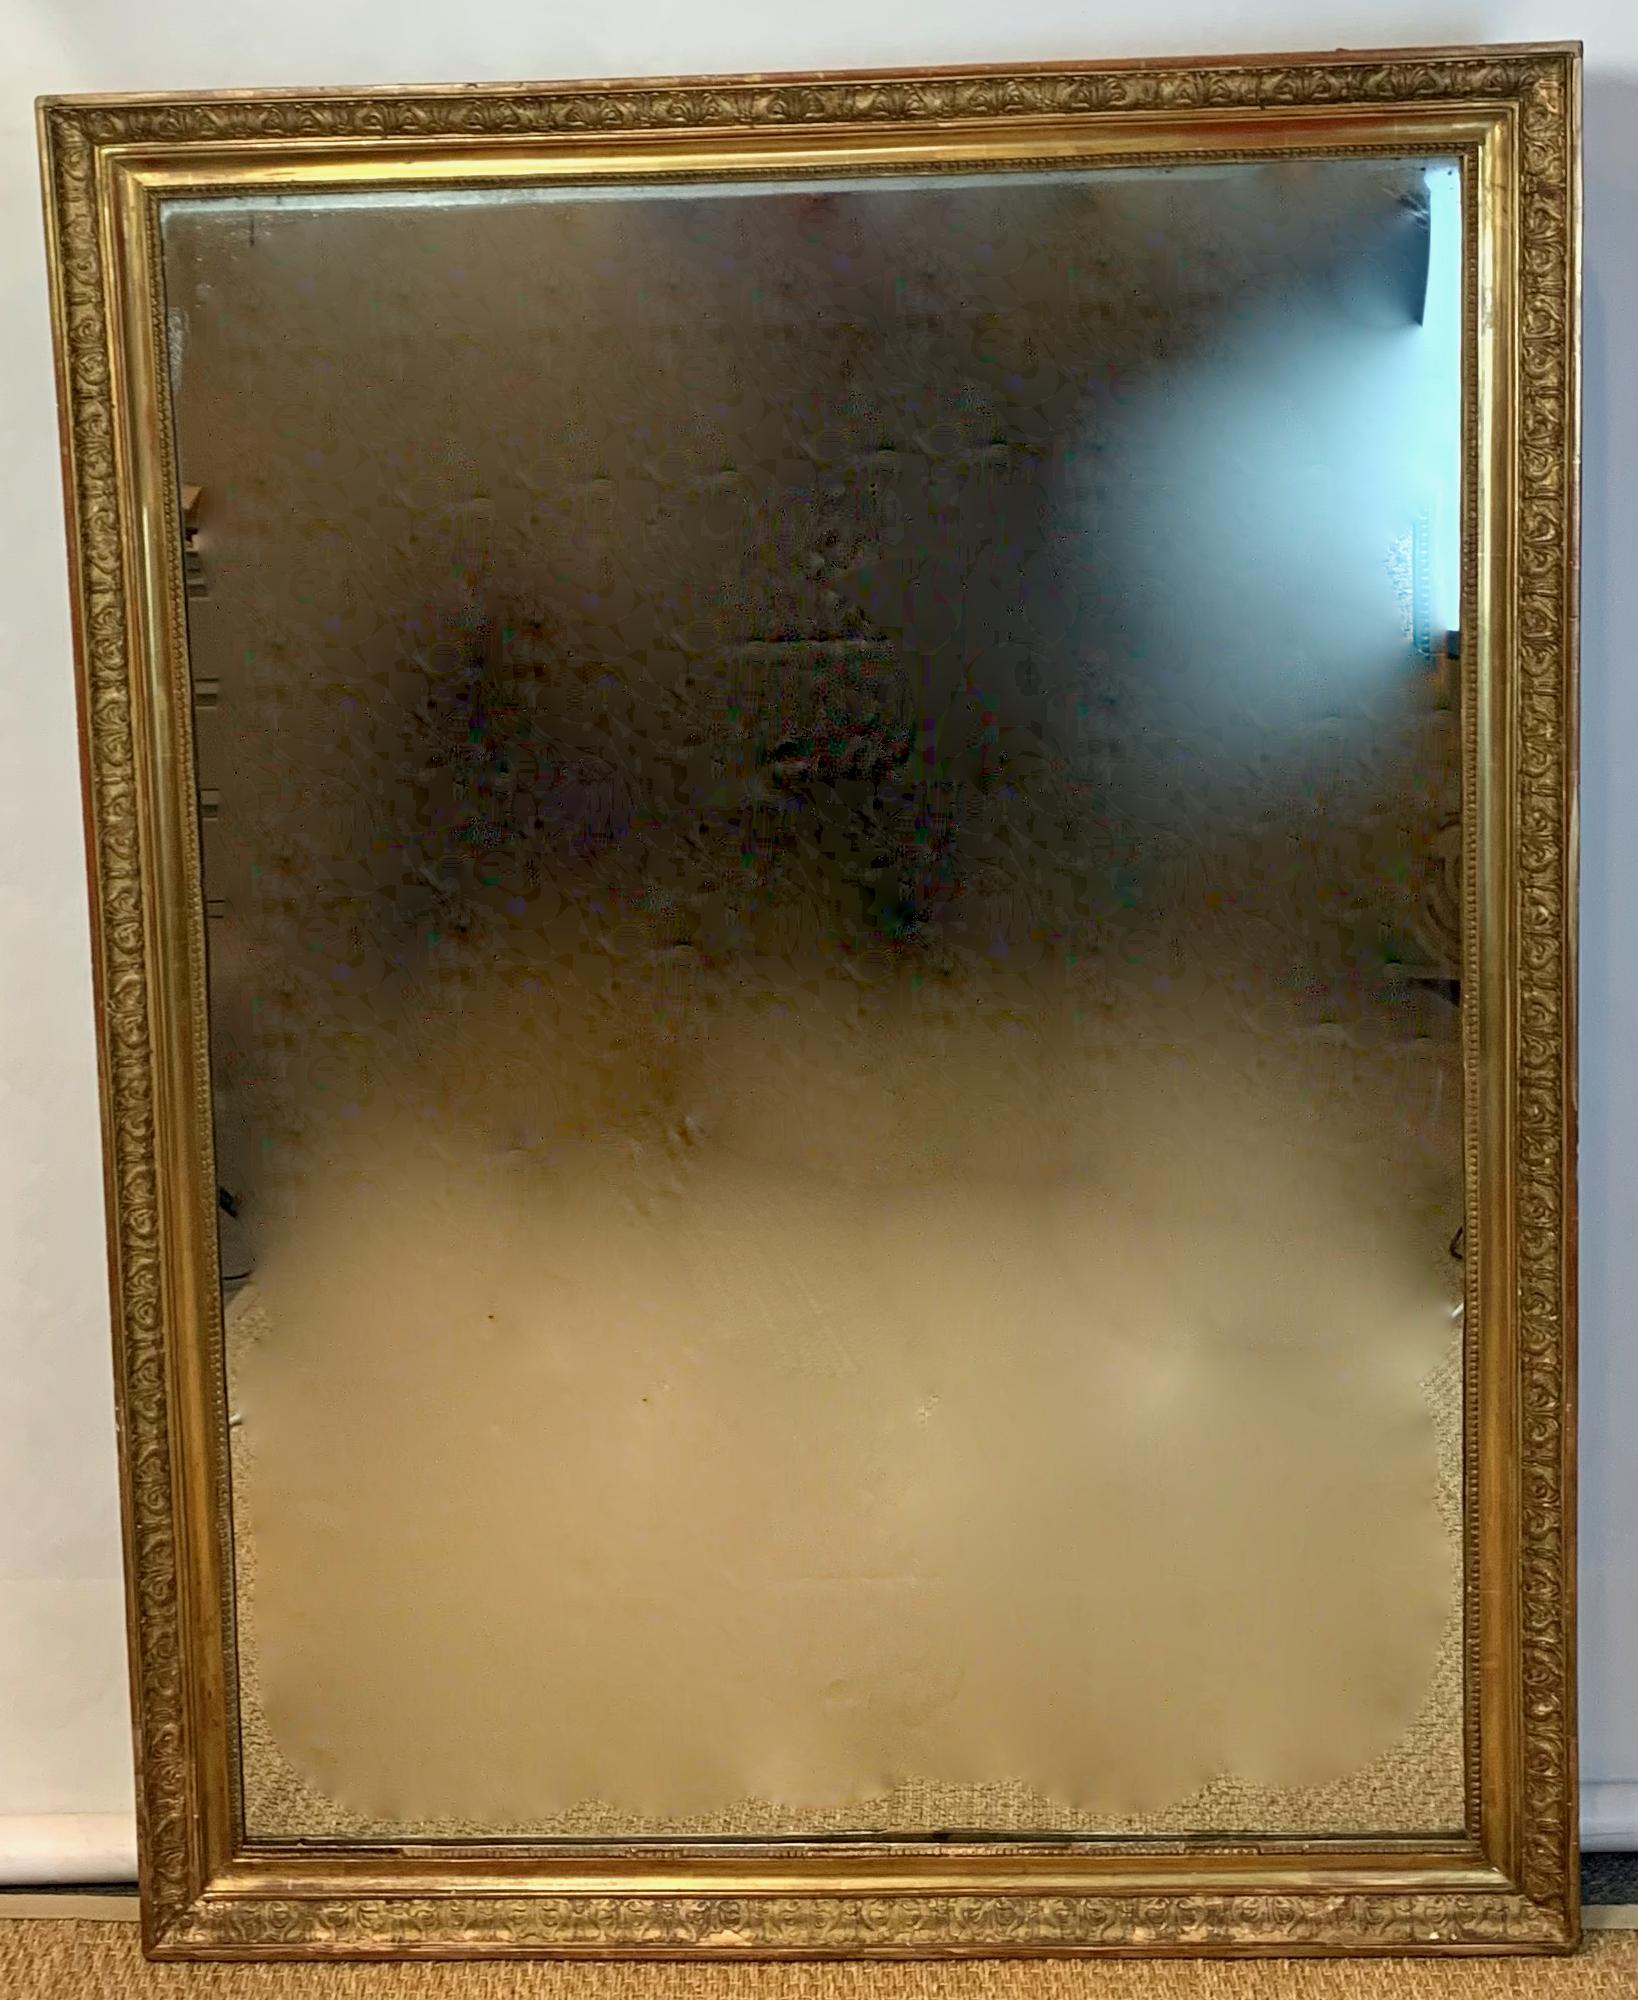 An early 19th century neoclassical French elegantly carved giltwood mirror of particularly large scale with original glass and wood back.